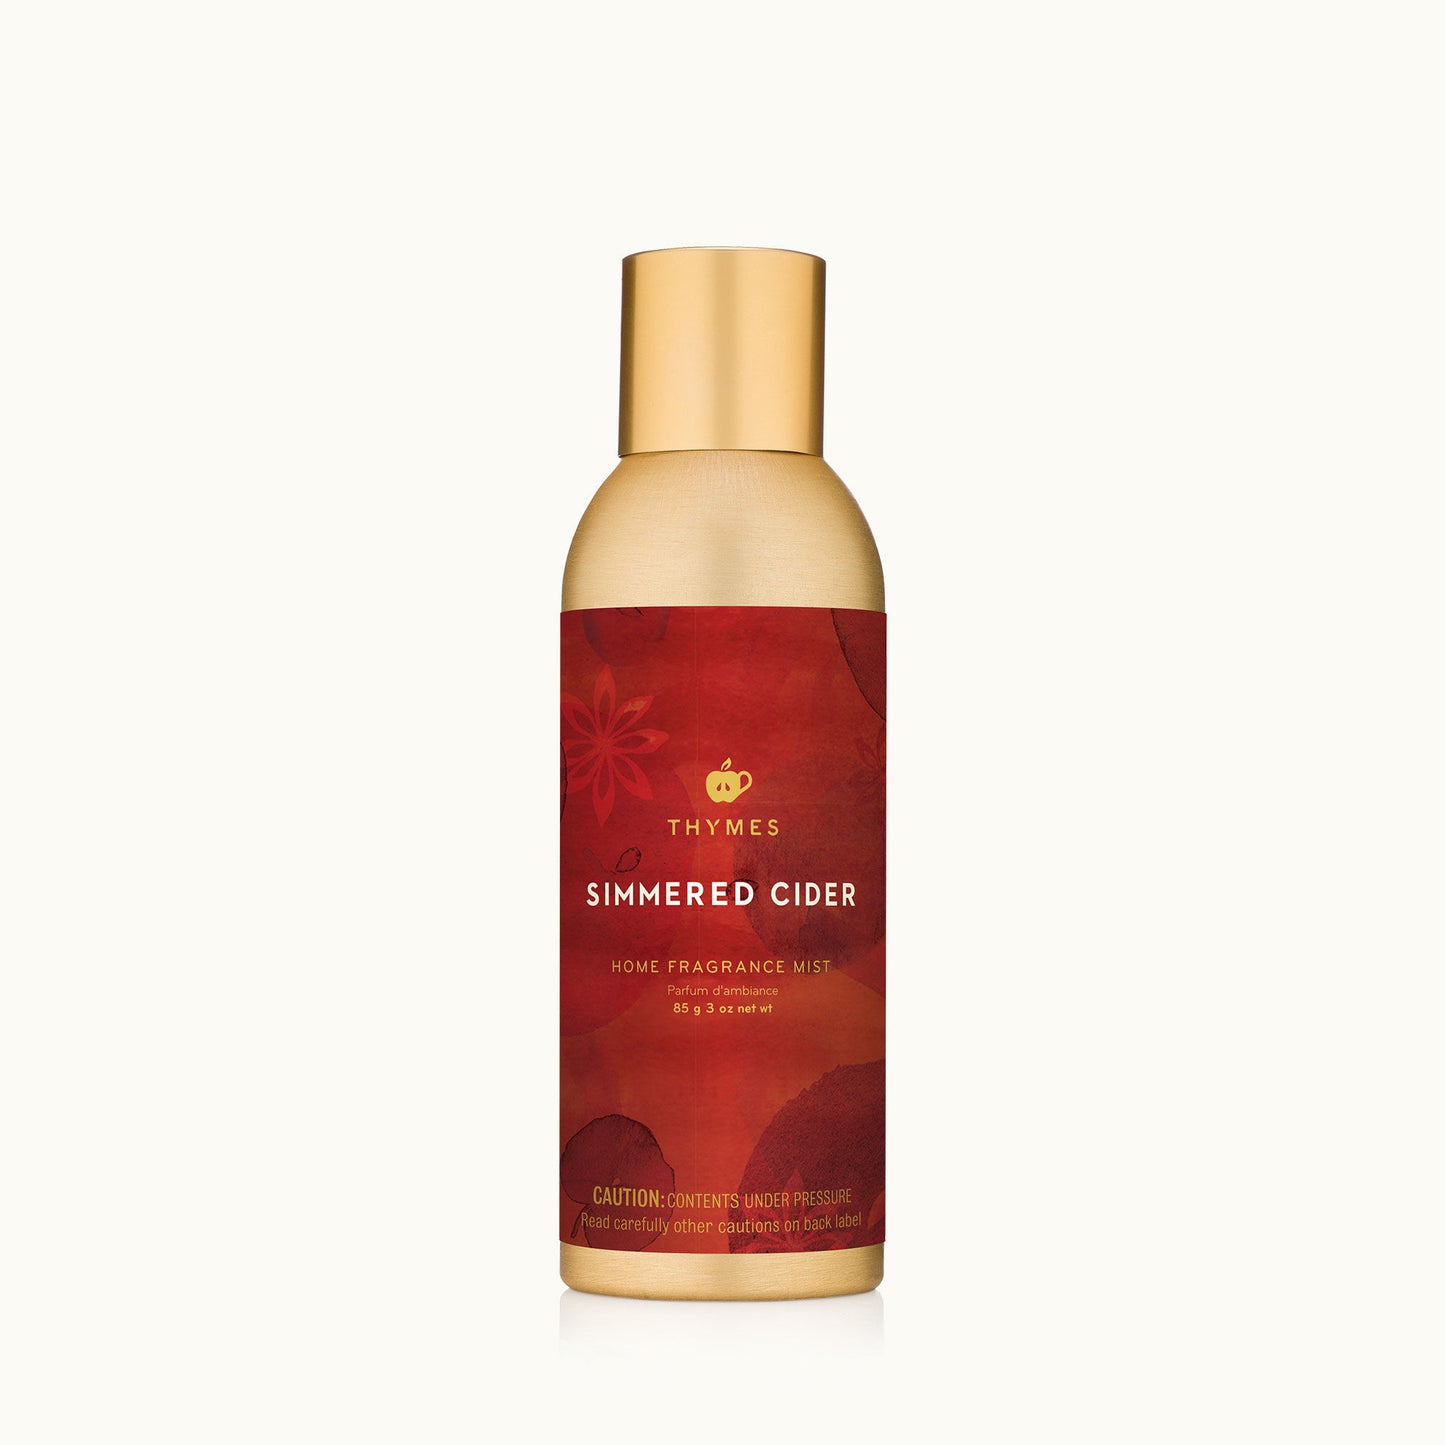 Thymes Simmered Cider Home Fragrance Mist-Room Spray-Thymes-The Village Shoppe, Women’s Fashion Boutique, Shop Online and In Store - Located in Muscle Shoals, AL.